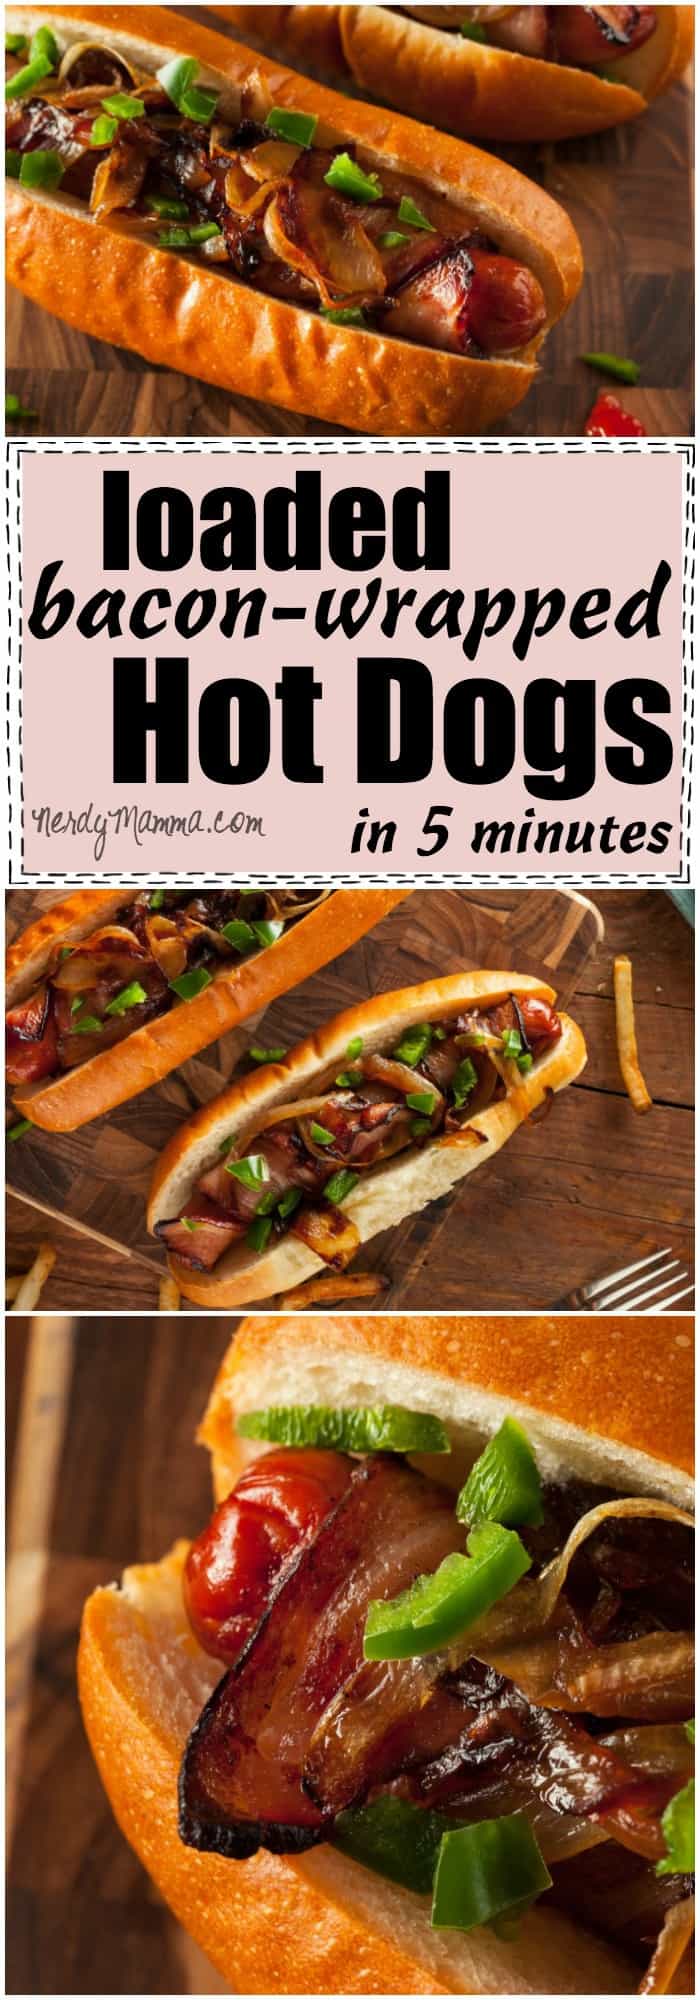 I cannot believe this super-fast and easy recipe for loaded bacon-wrapped hot dogs. I mean, 5 minutes to this! Yum!